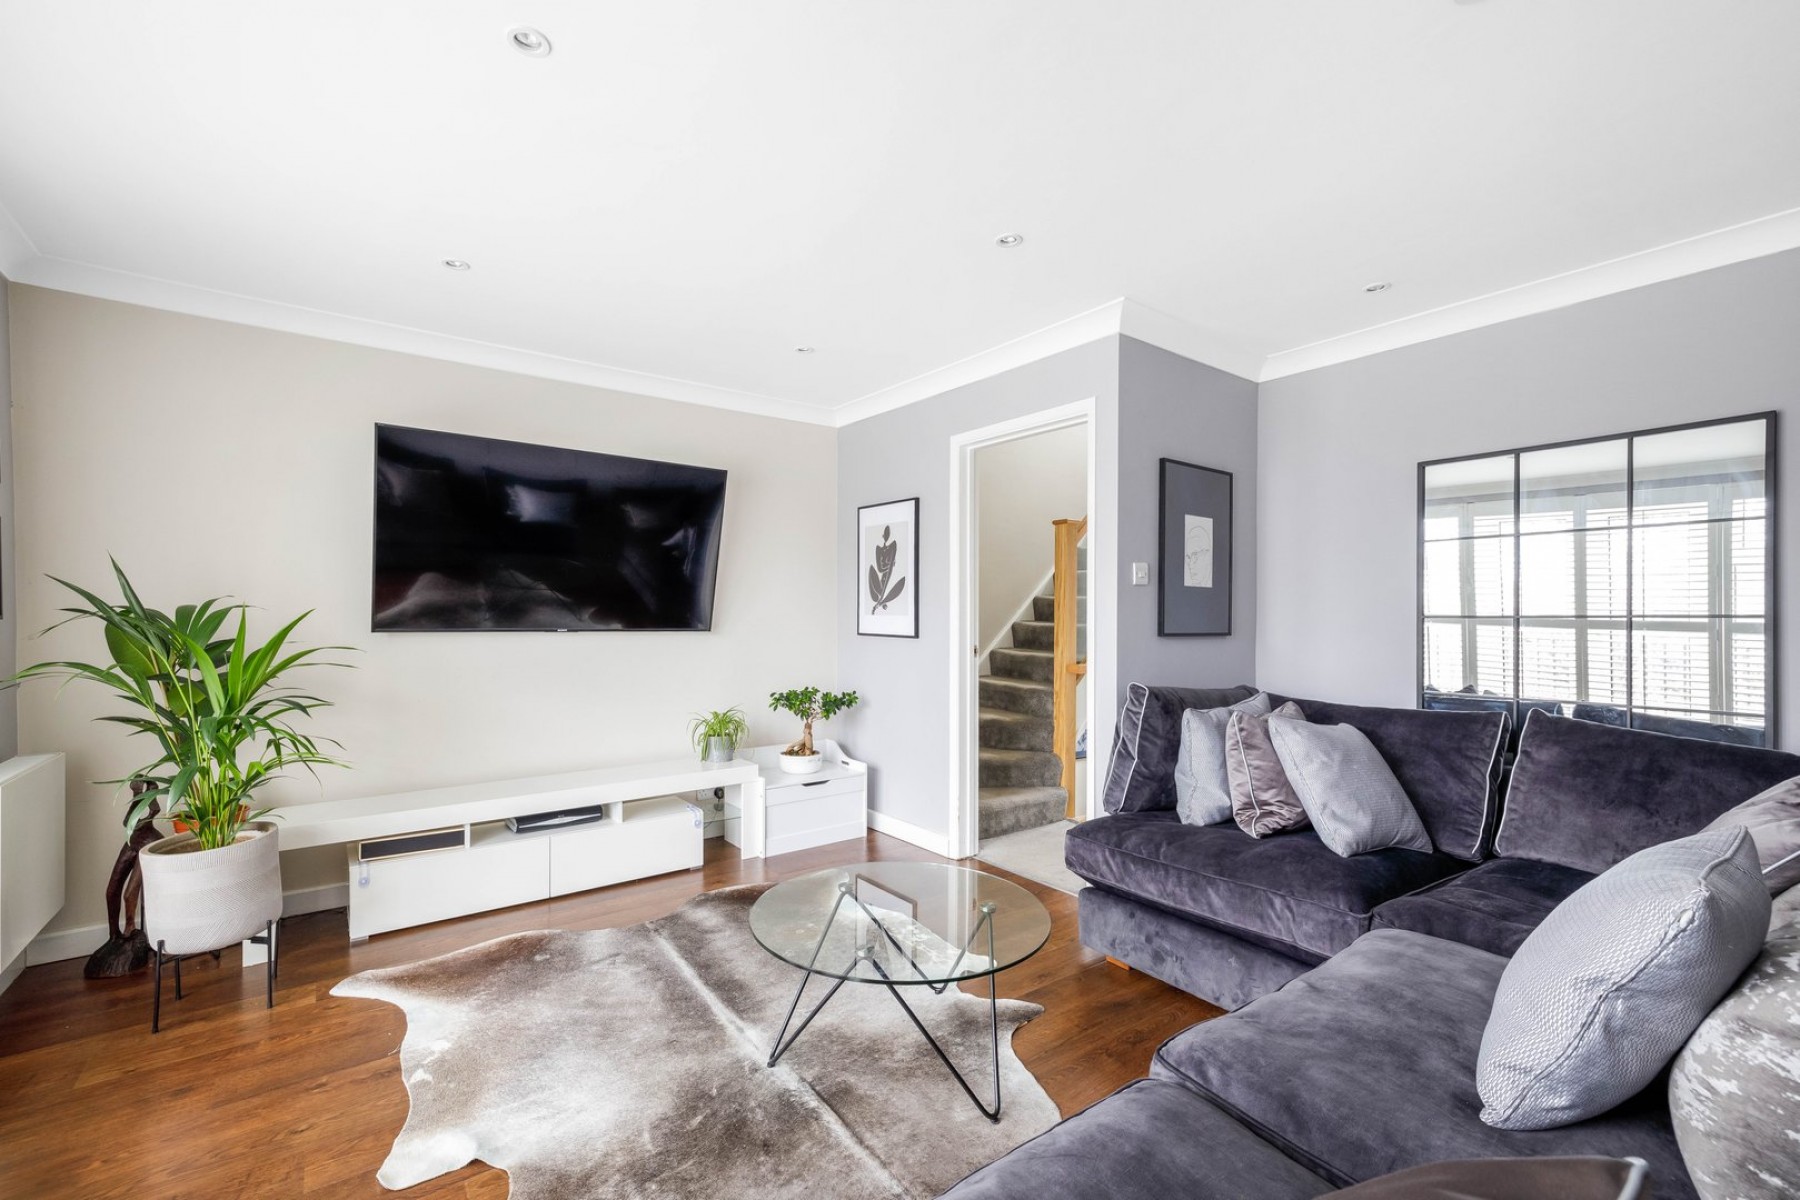 Images for Coniston Road, Bromley, Kent